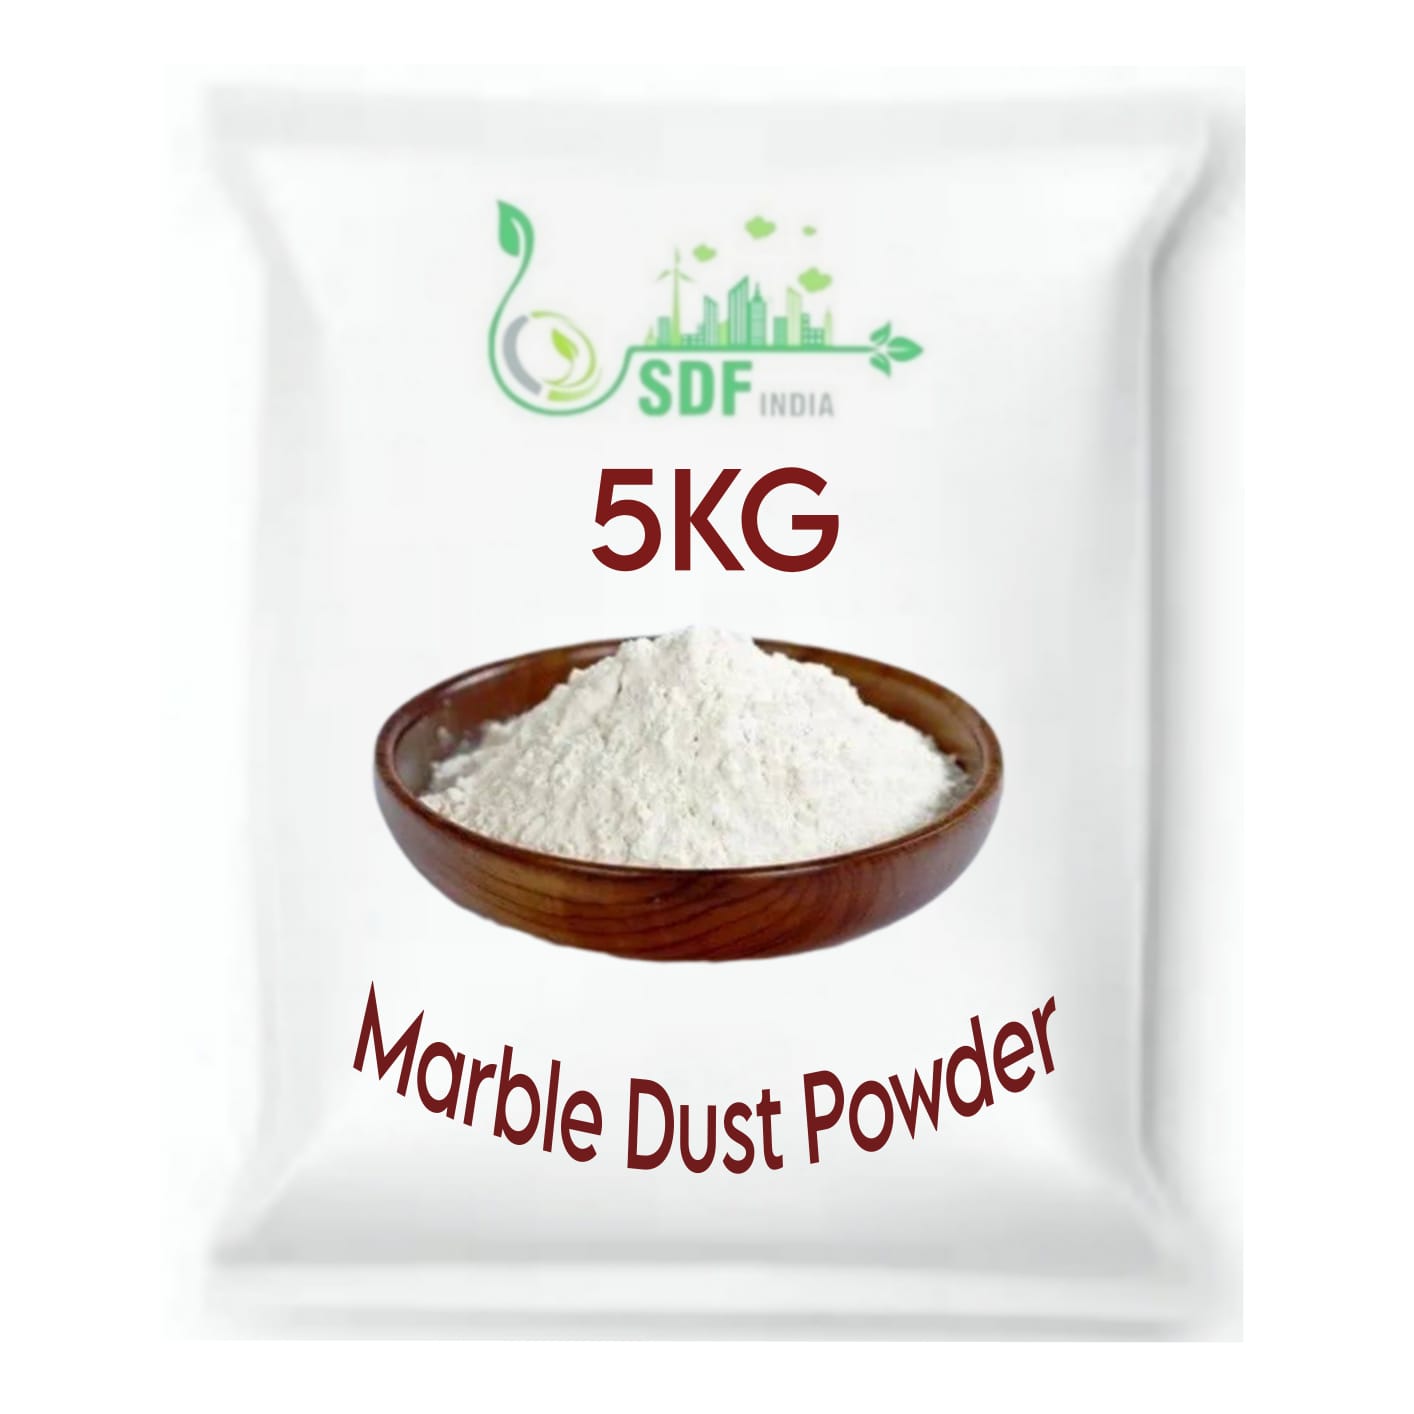 SDF INDIA Marble dust, White Marble Powder for Mural Art, Relief Painting, Raised Art, Persian Art, DIY, Gift for Artists, Students, Children & for All Arts (5KG)